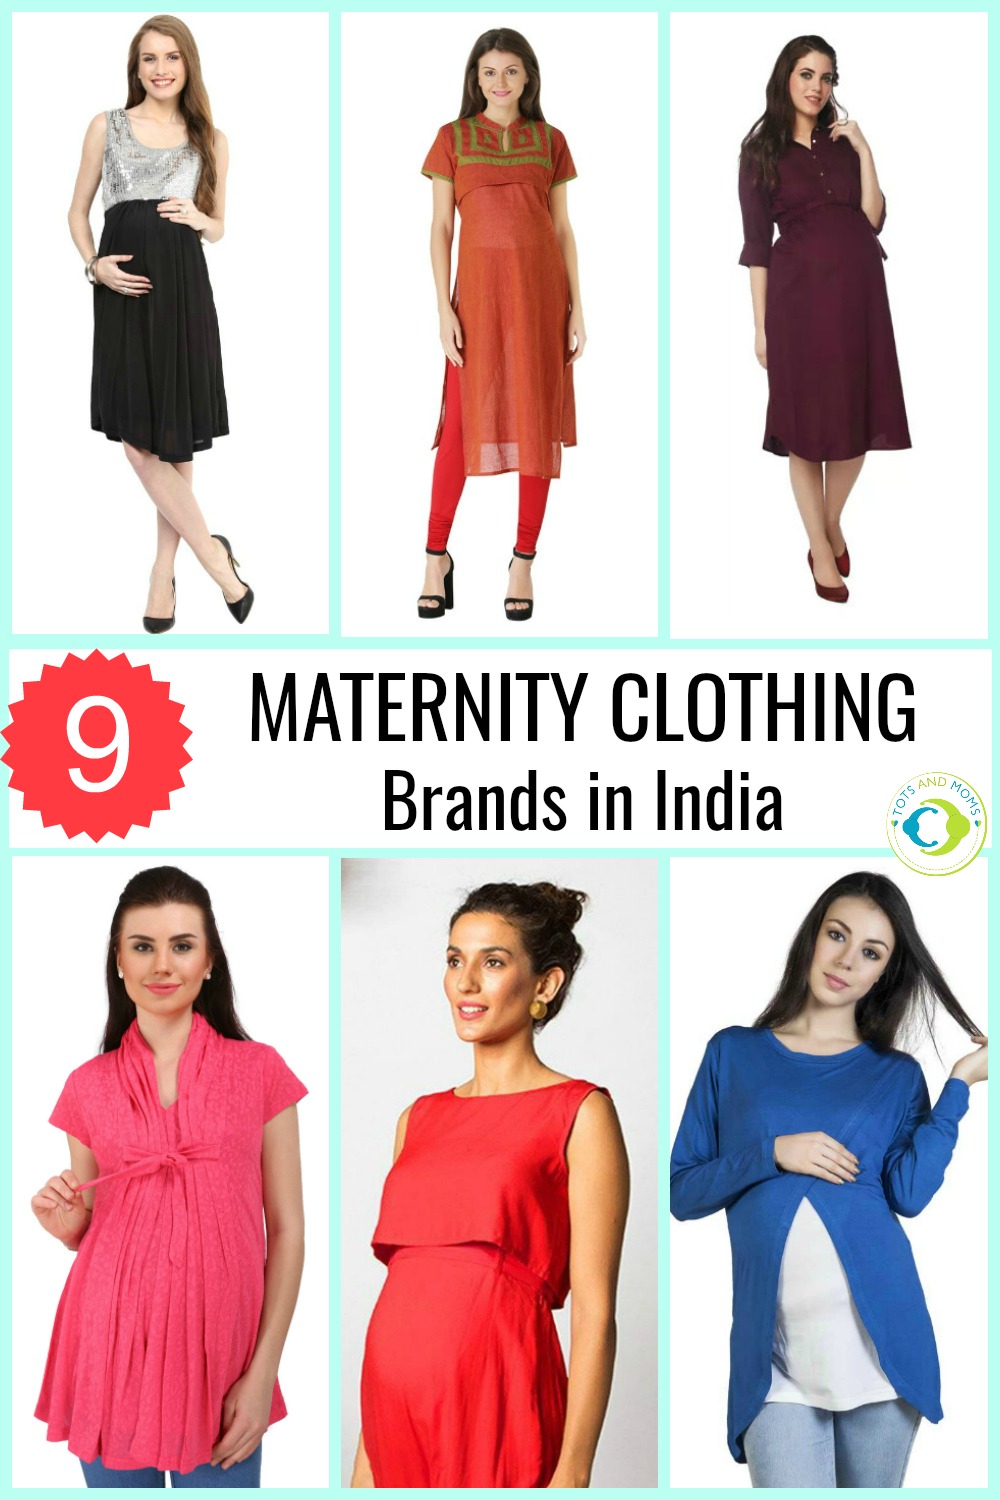 9 Top Maternity Clothing Brands in India